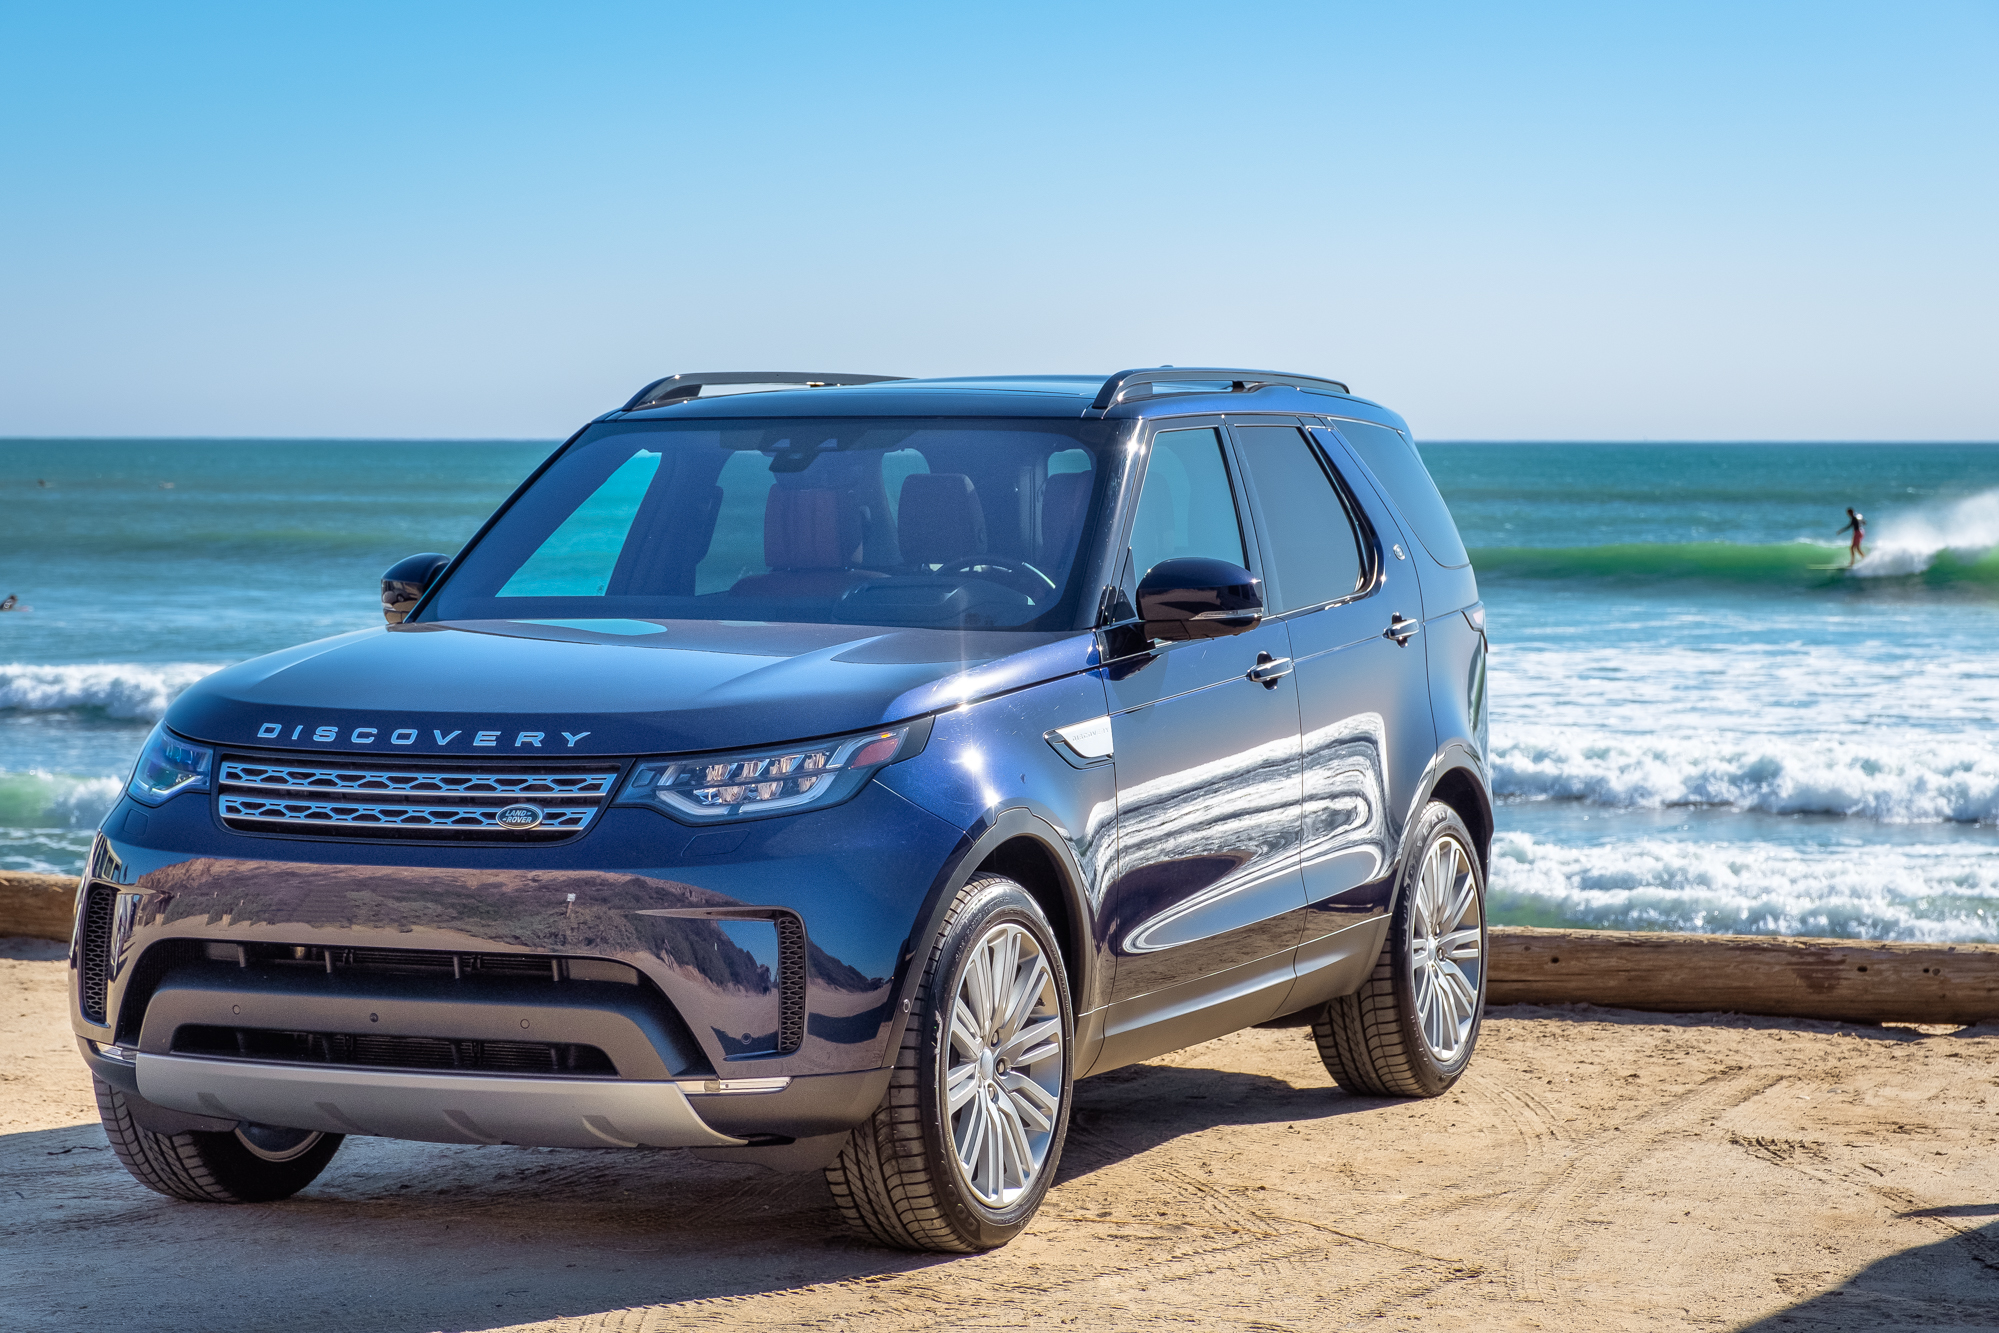 Field Tested: Land Rover Discovery 5 - Expedition Portal